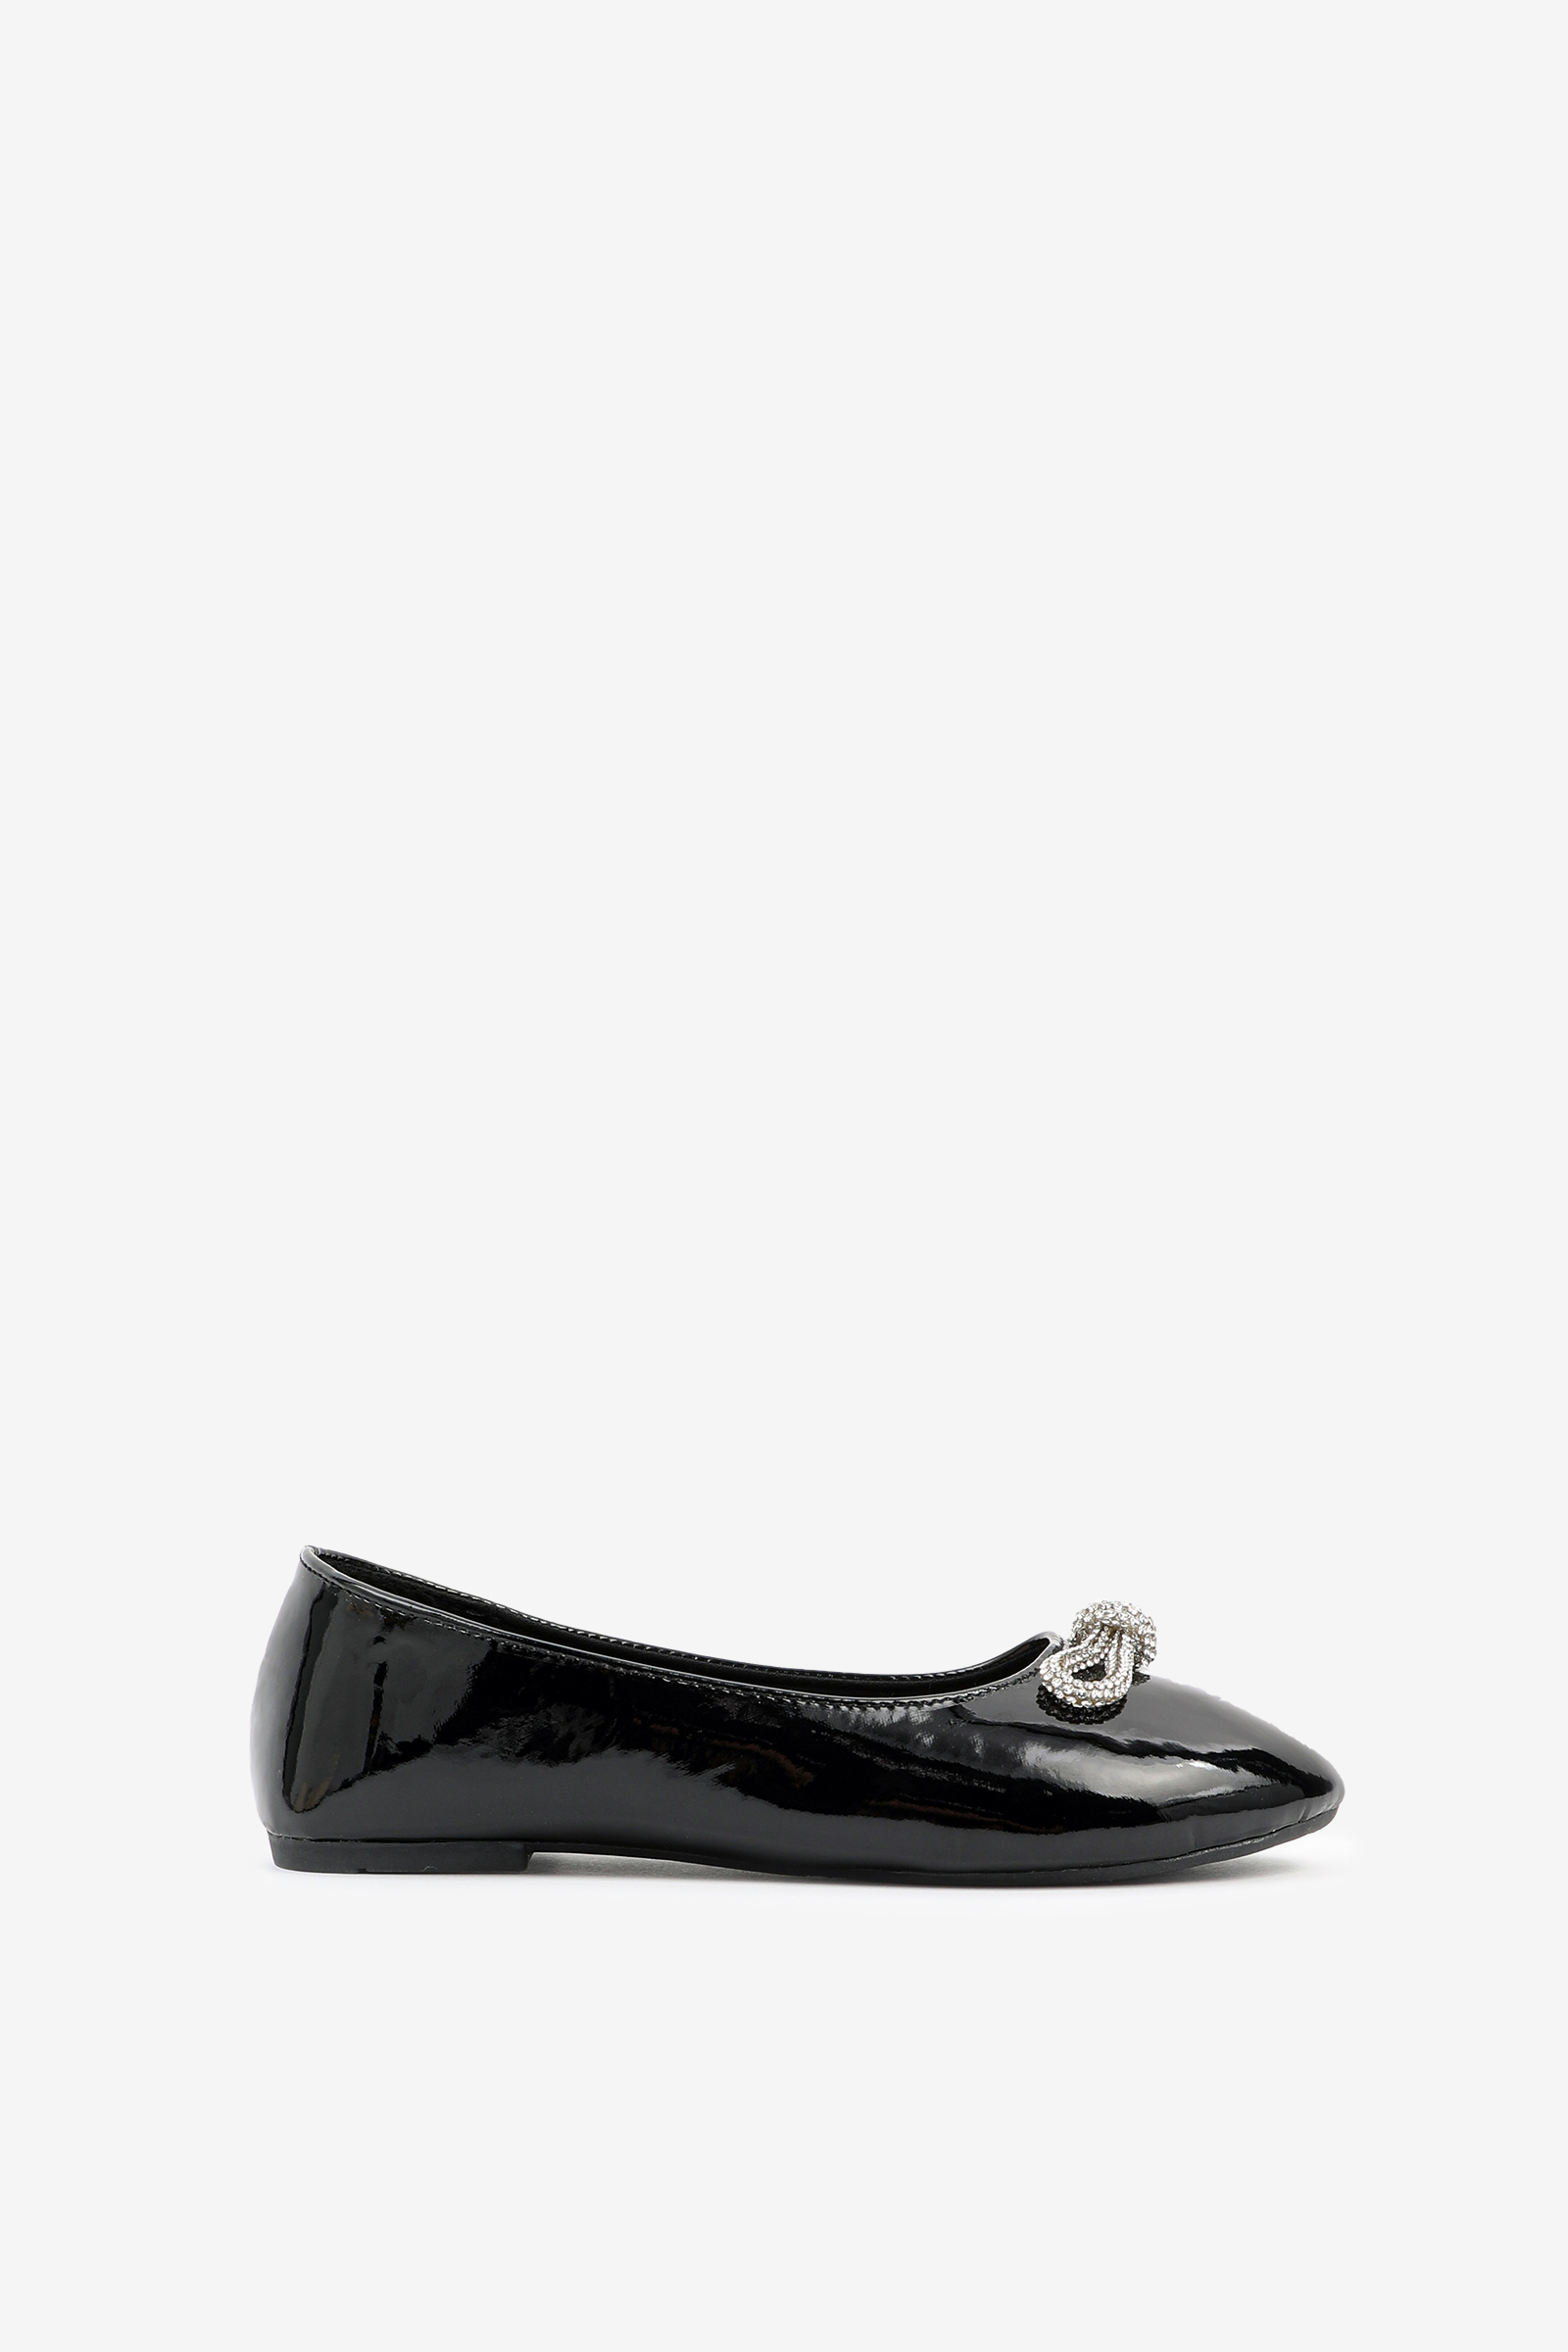 Ardene Ballet Flats with Rhinestone Bow Embellishment in Black | Size | Faux Leather/Rubber